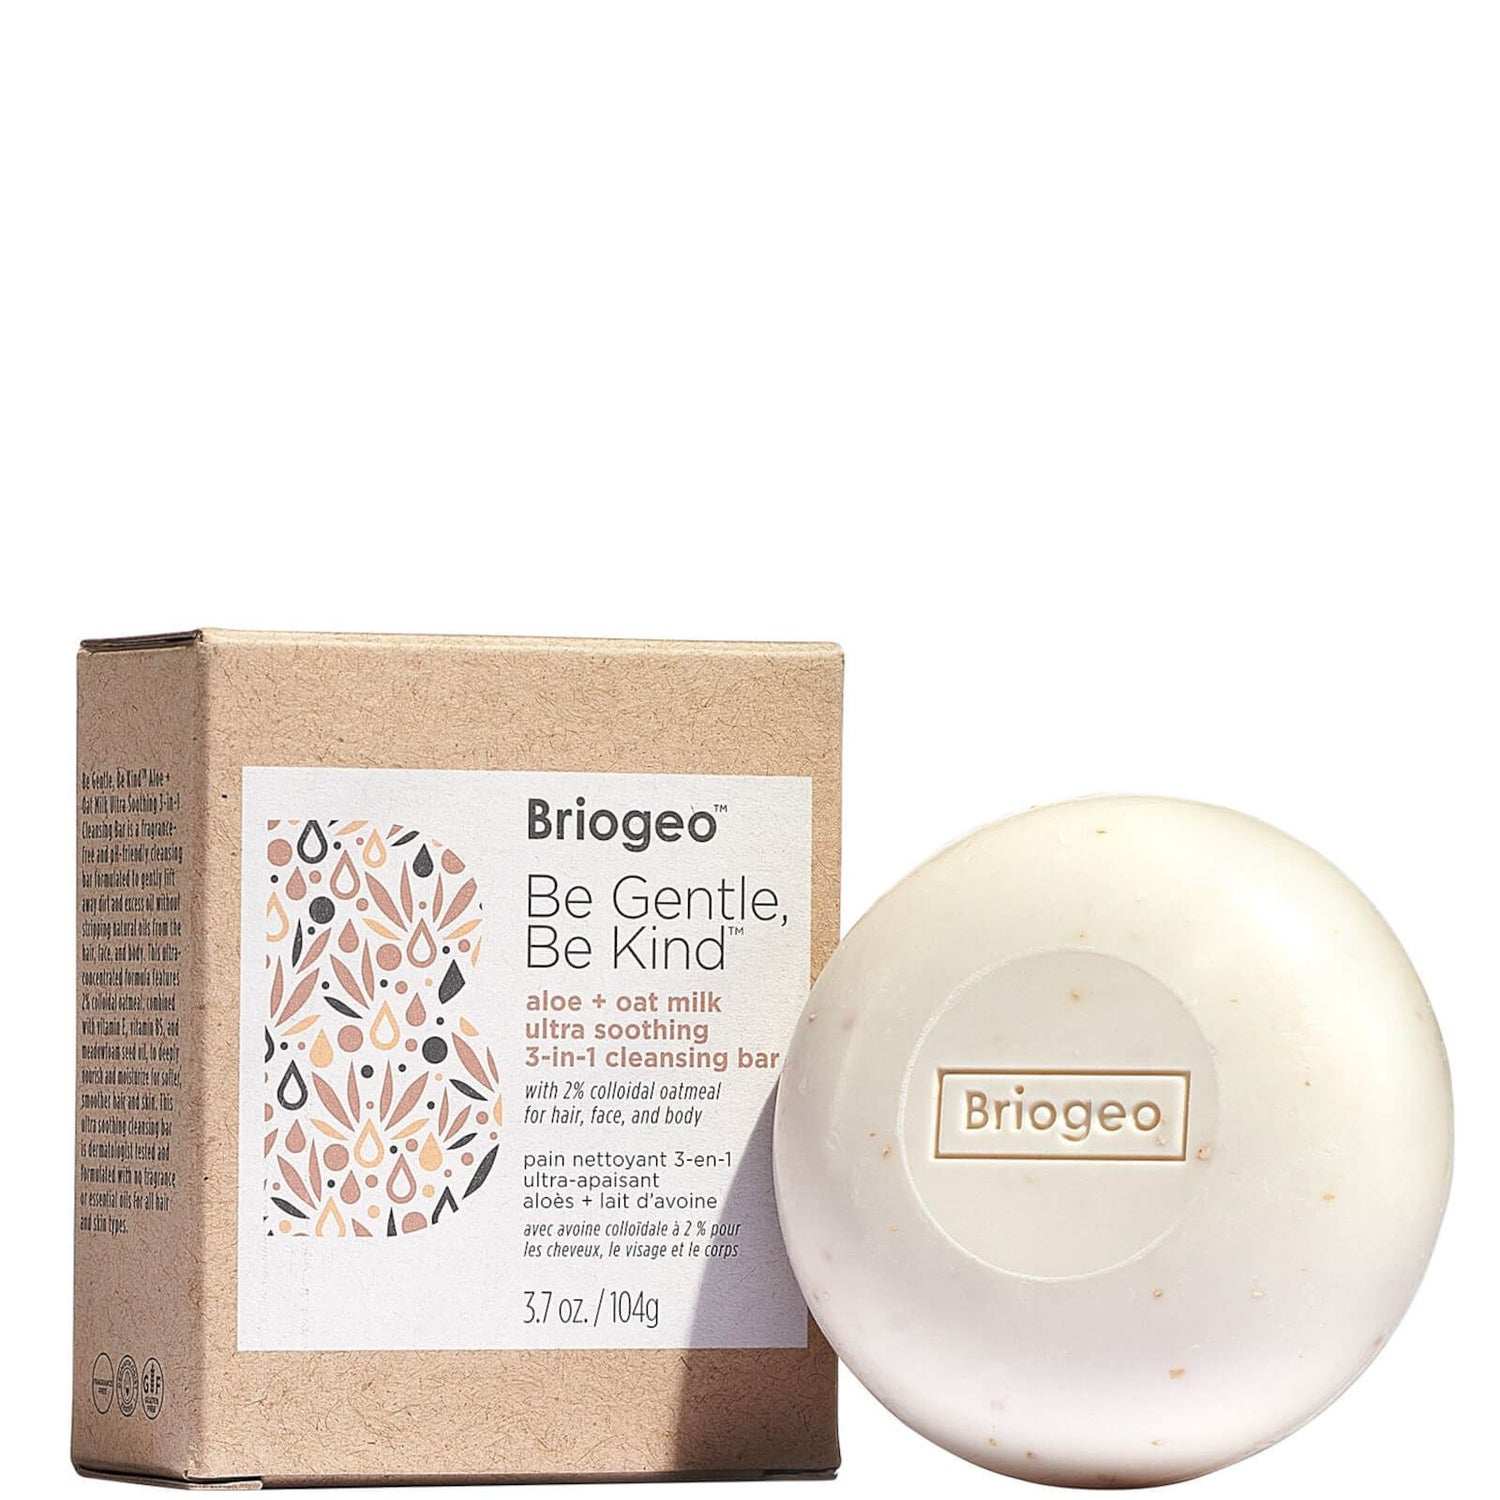 Briogeo Be Gentle, Be Kind Aloe and Oat Milk Ultra Soothing 3-in-1 Cleansing Bar 104g